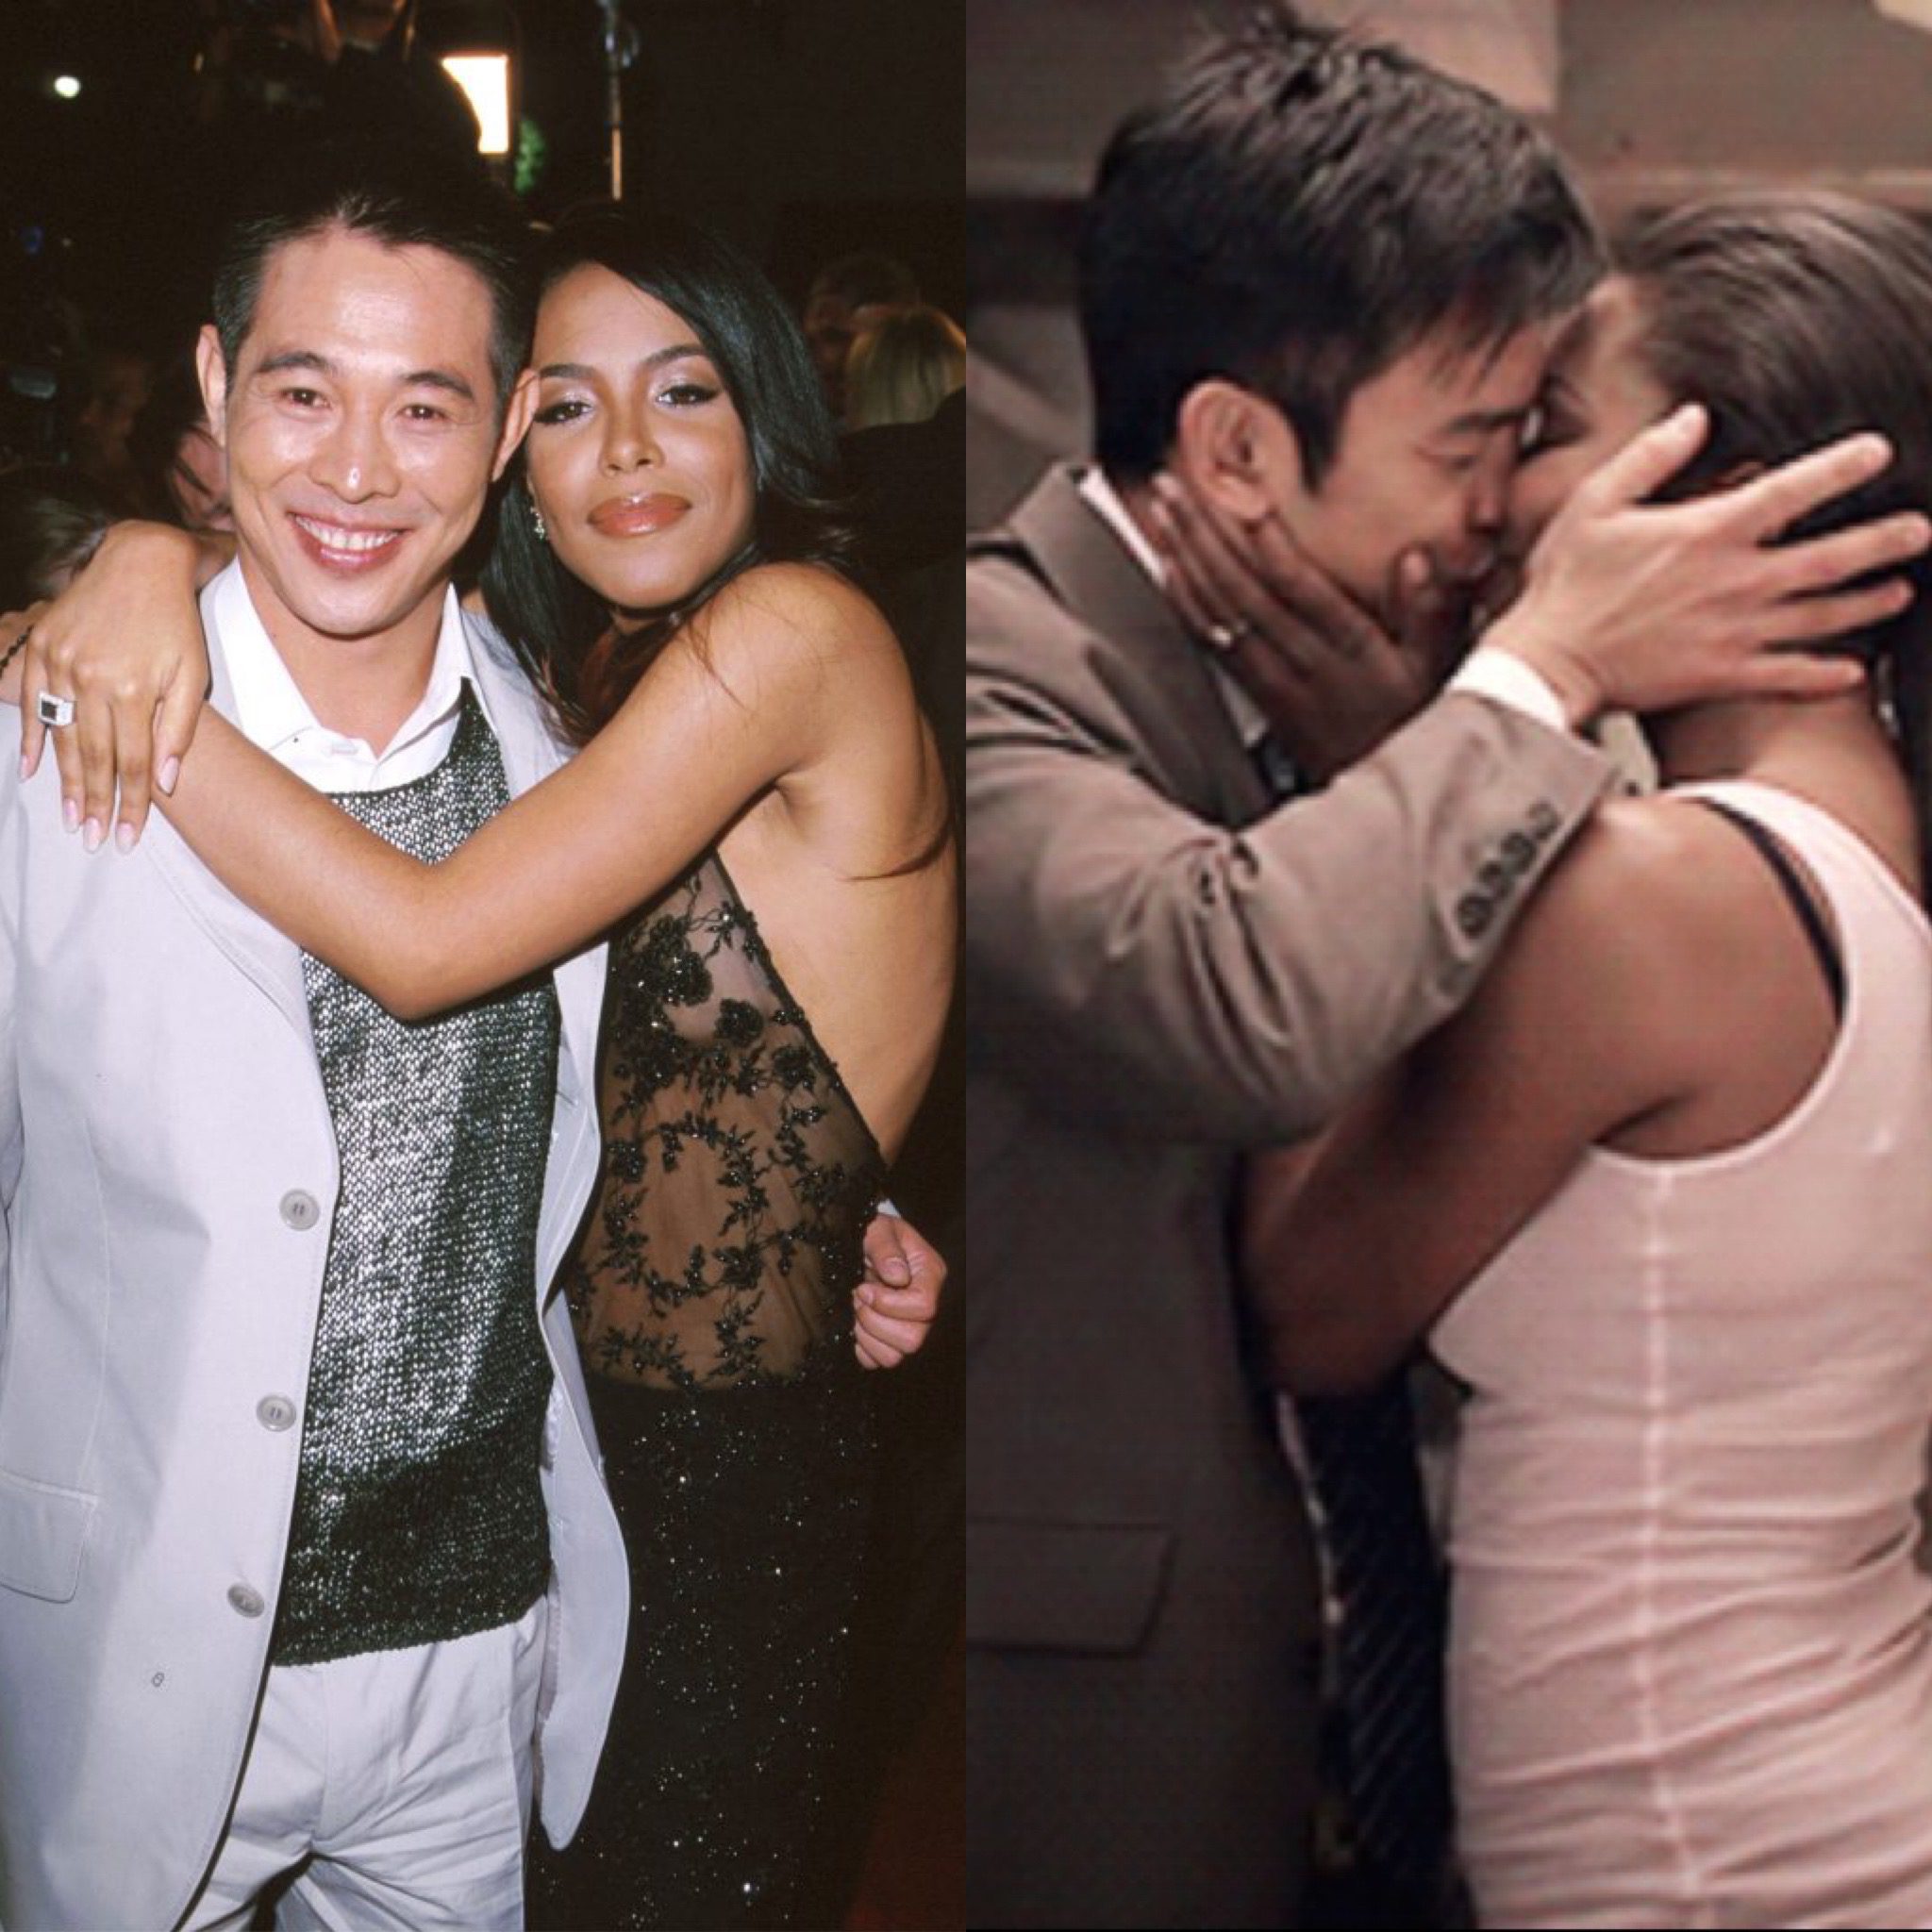 AMBW Couple Representation in Hollywood - From Never Kissing with Jet Li and Aaliyah to Lovers John Cho and Gabrielle Union